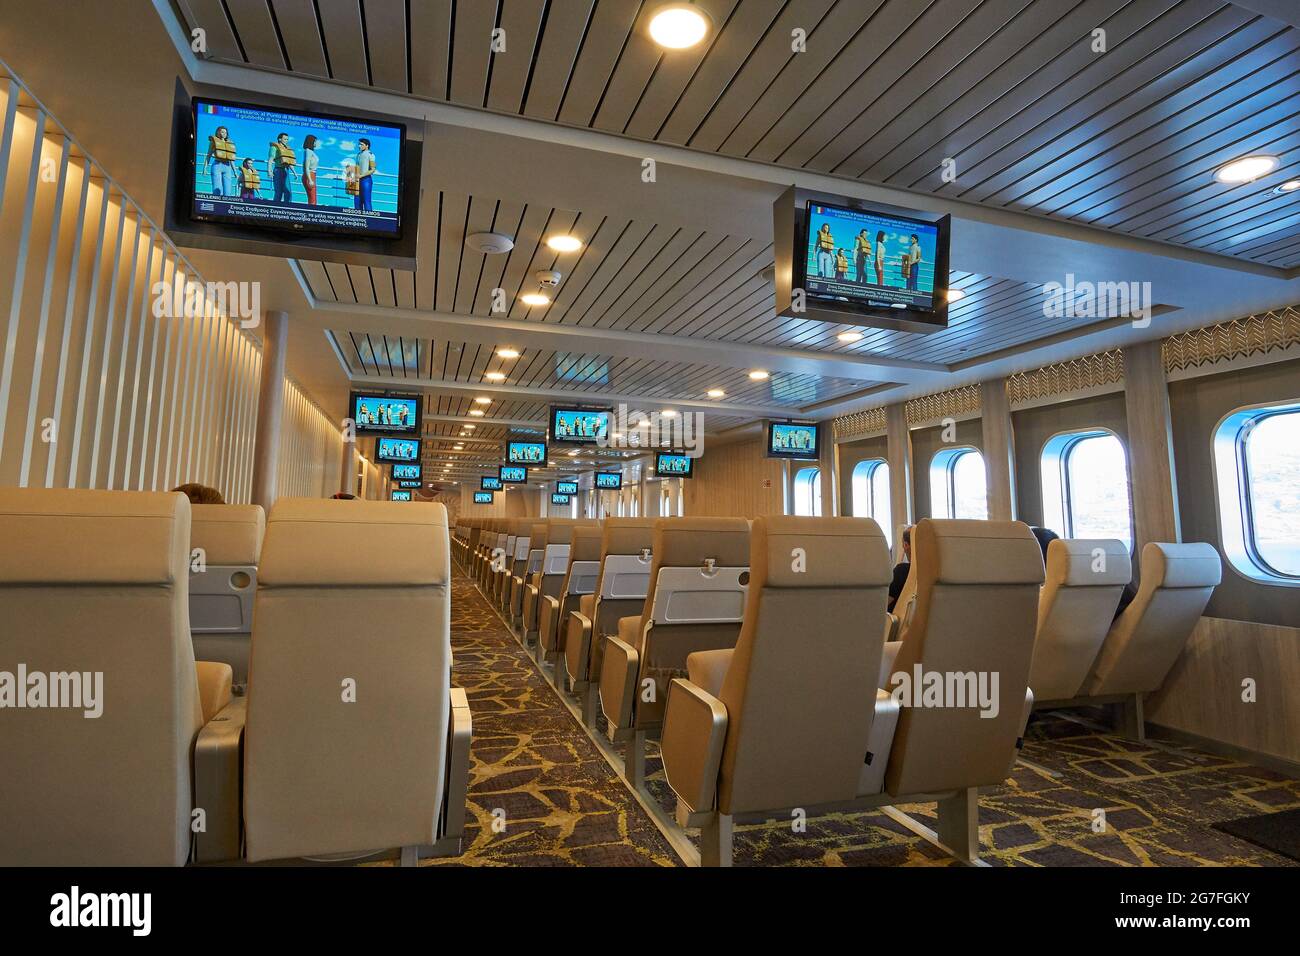 Knead Betsy Trotwood School education ATHENS, GREECE - JUNE 2017: Interior view of the Nissos Rodos Ferry boat  from Hellenic Seaways company Stock Photo - Alamy